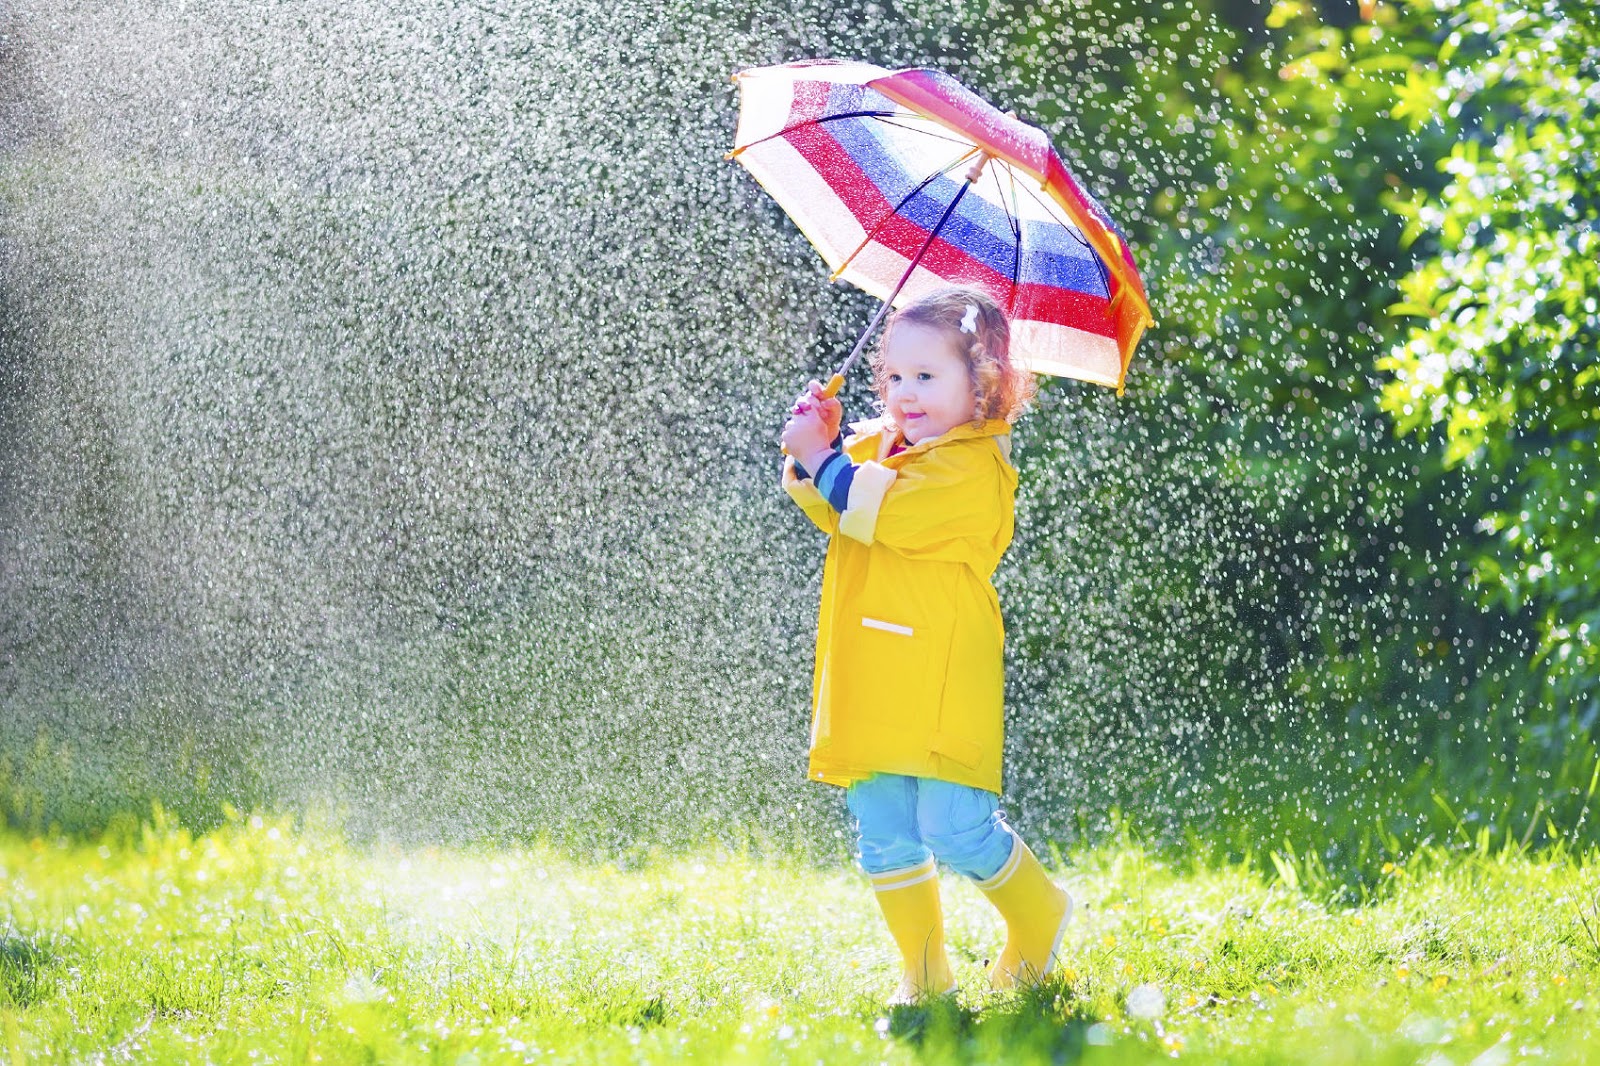 4 Fun Things to Do with Your Kids on Rainy Days